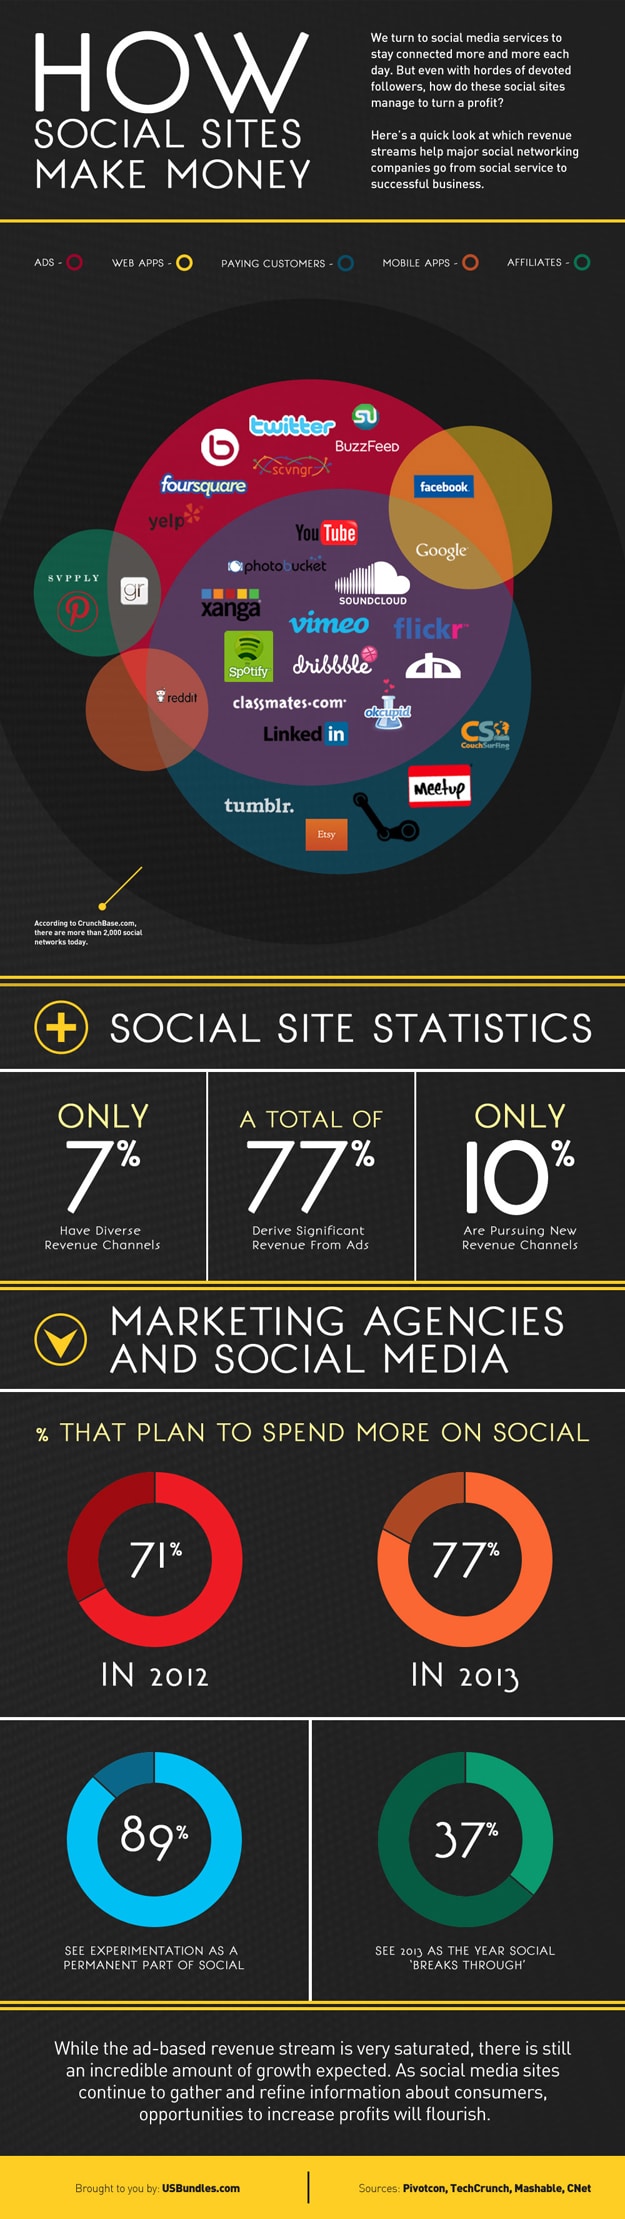 How Social Media Sites Make Their Money [Infographic]